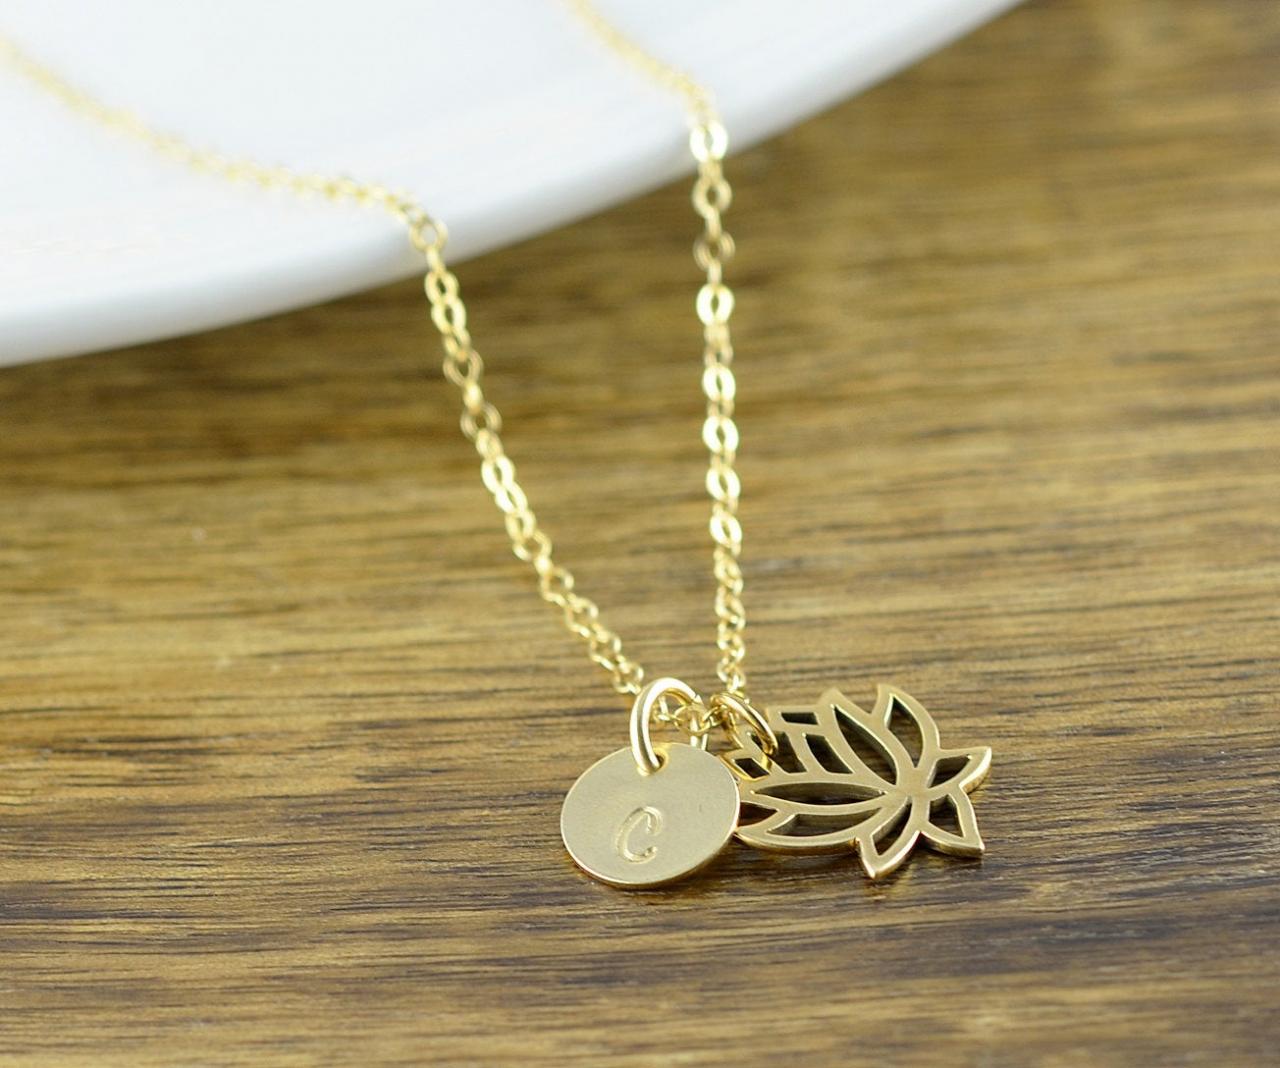 Lotus Necklace - Personalized Lotus Necklace - Gold Lotus Necklace - Lotus Jewelry - Lotus Necklace Gift - Gift For Yoga Lover -yoga Jewelry